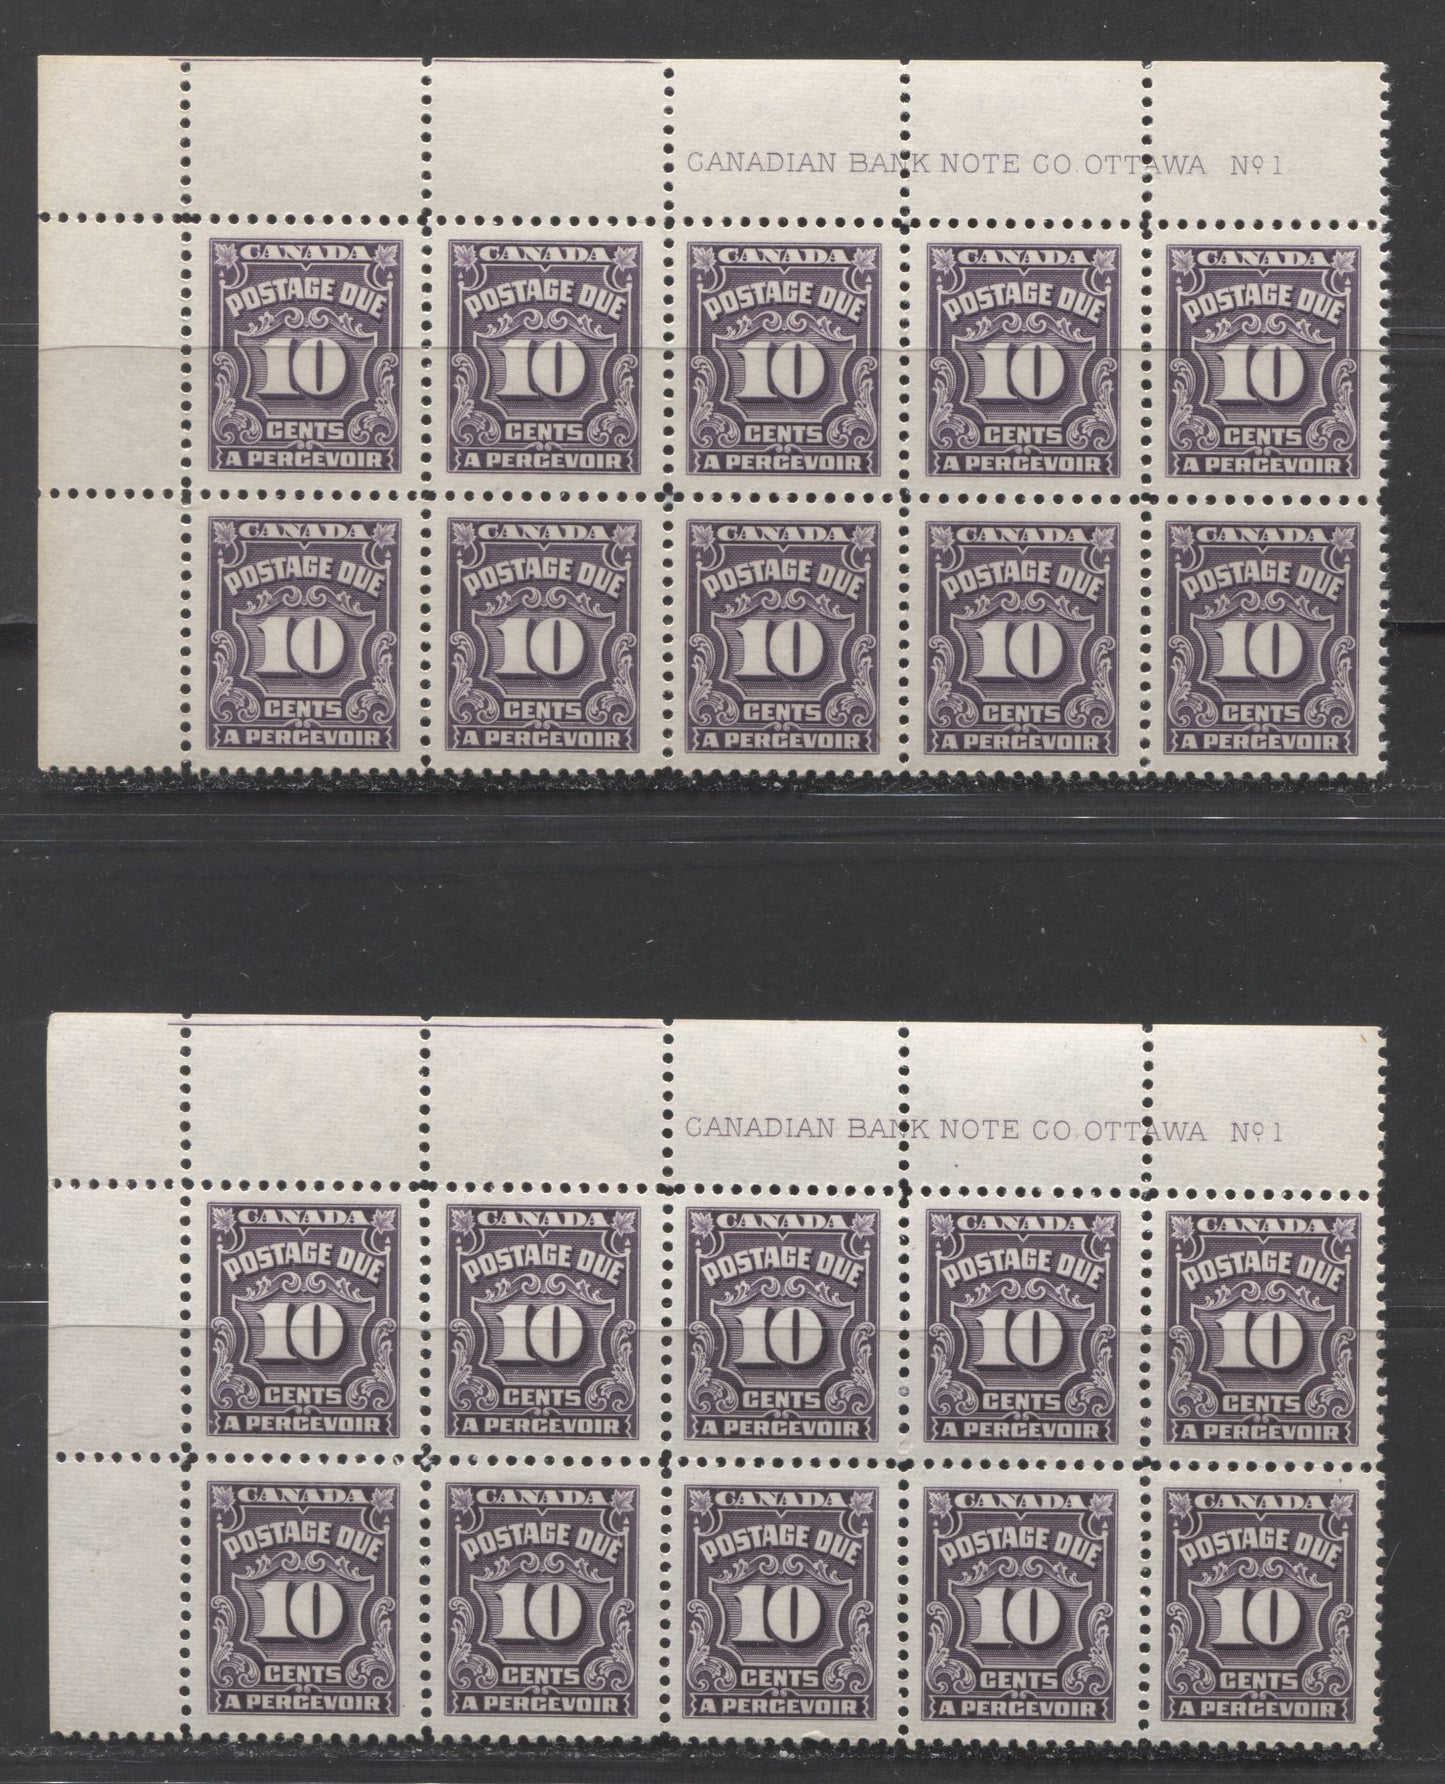 Lot 89 Canada #J20 10c Violet & Deep Rose Lilac, 1935-1965 Fourth Postage Due Issue, 2 VFNH UL Plate 1 Blocks Of 10 On Ribbed Paper With Cream Gum